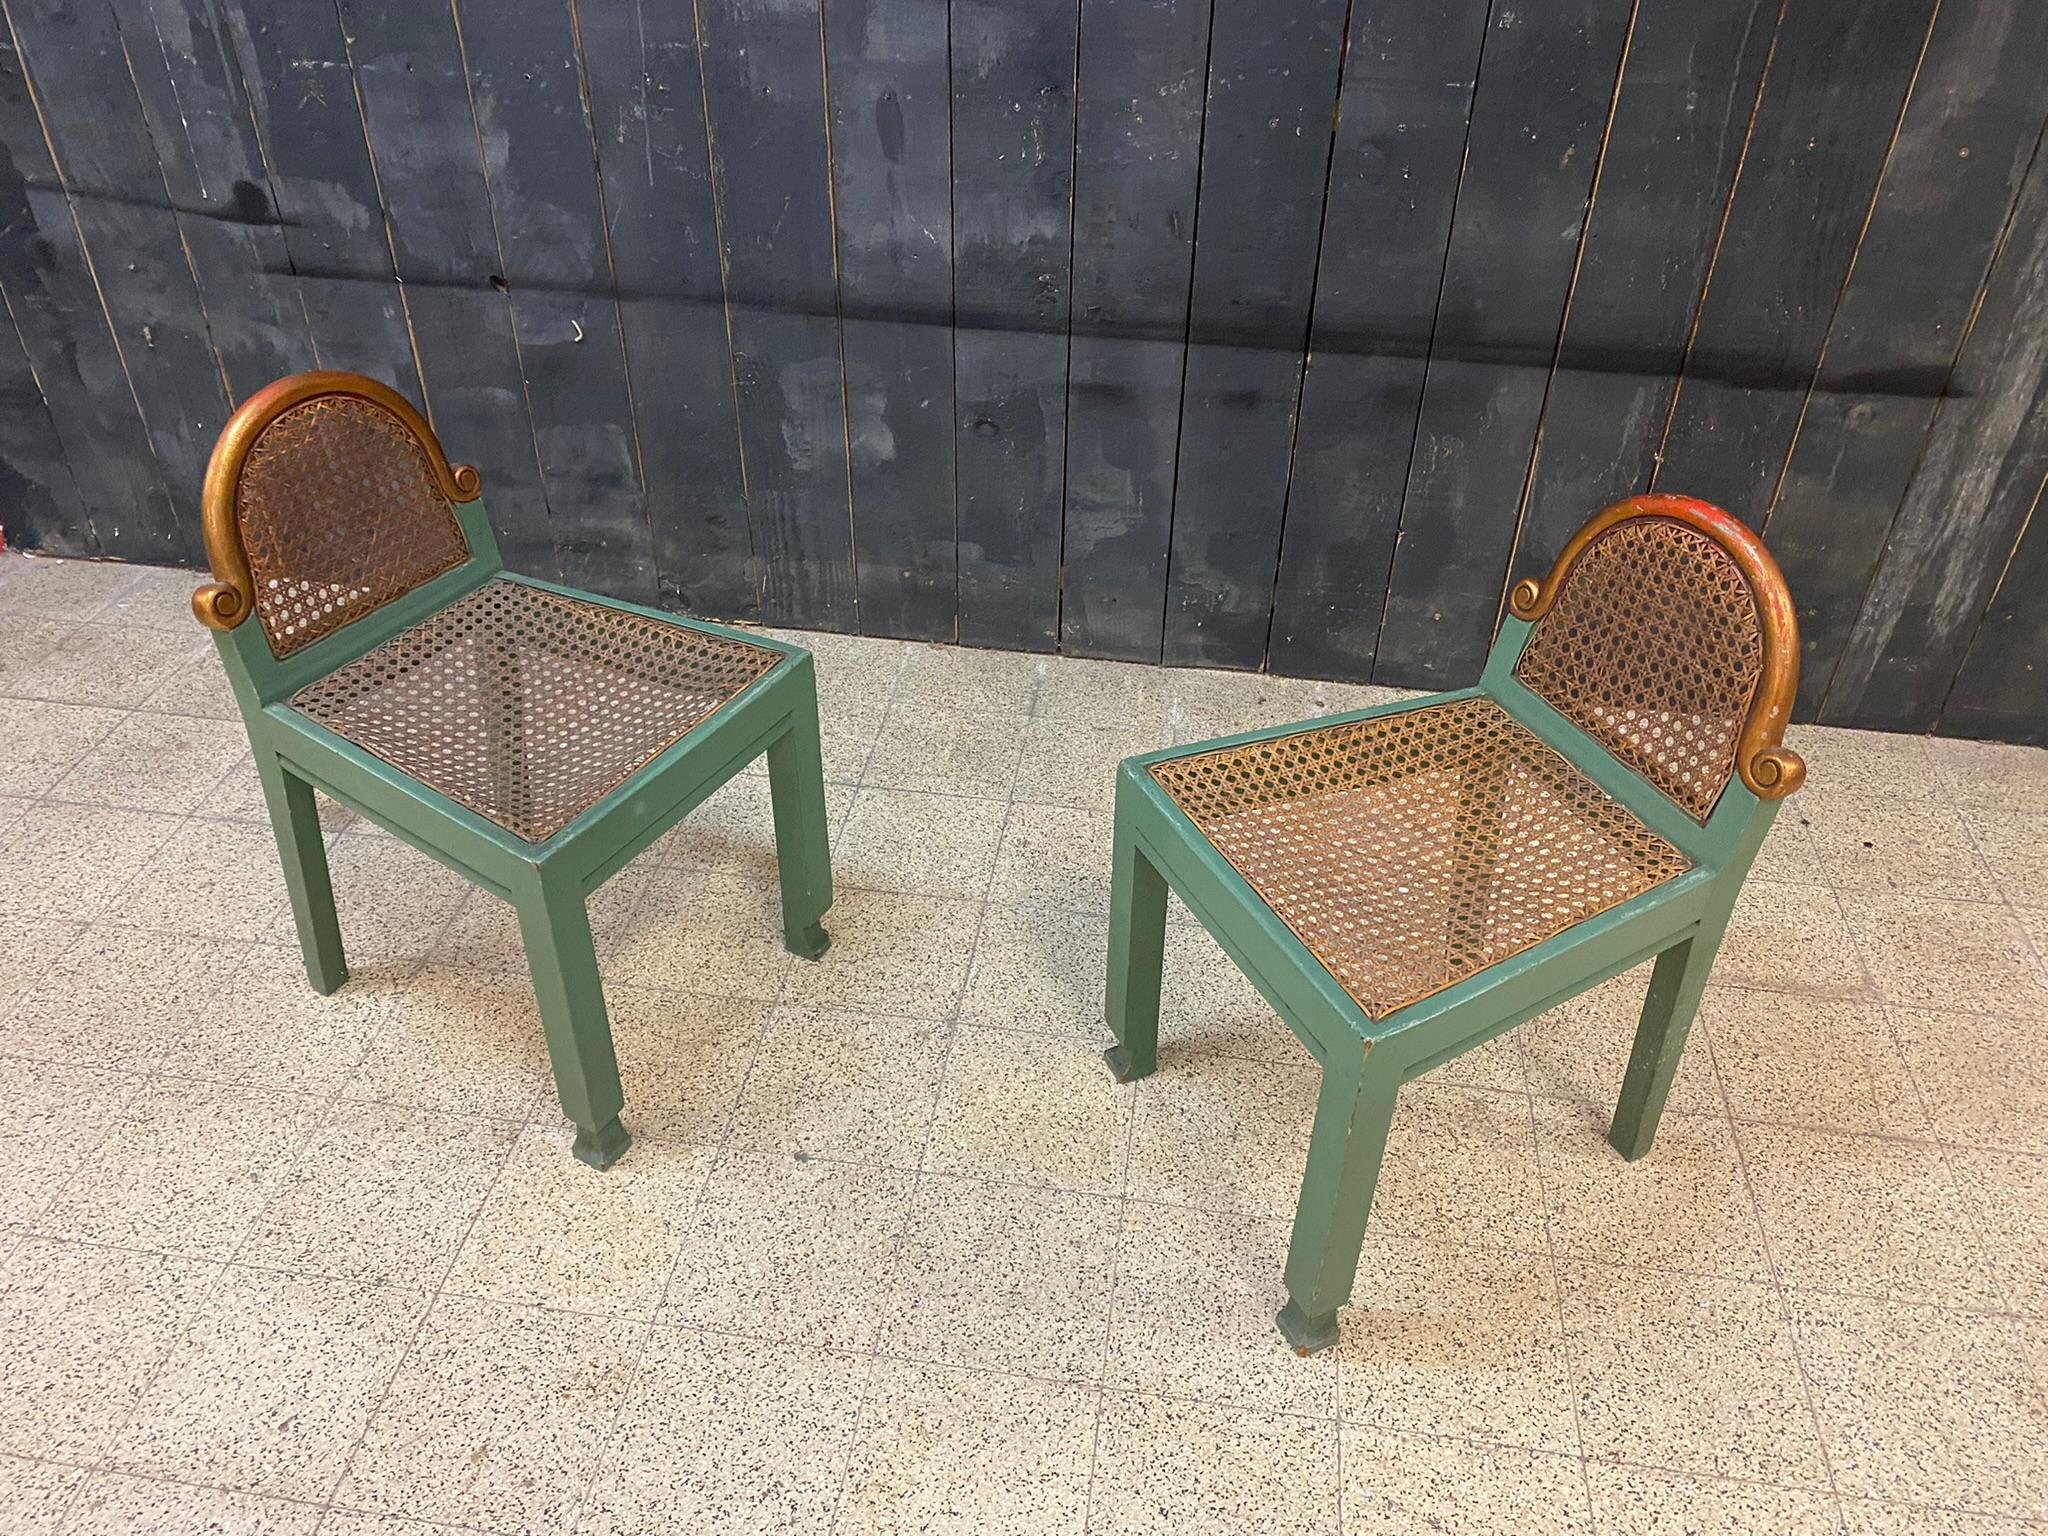 Pair of Small Modernist Chairs in Lacquered Beech and Cane, Belgium circa 1925 For Sale 2